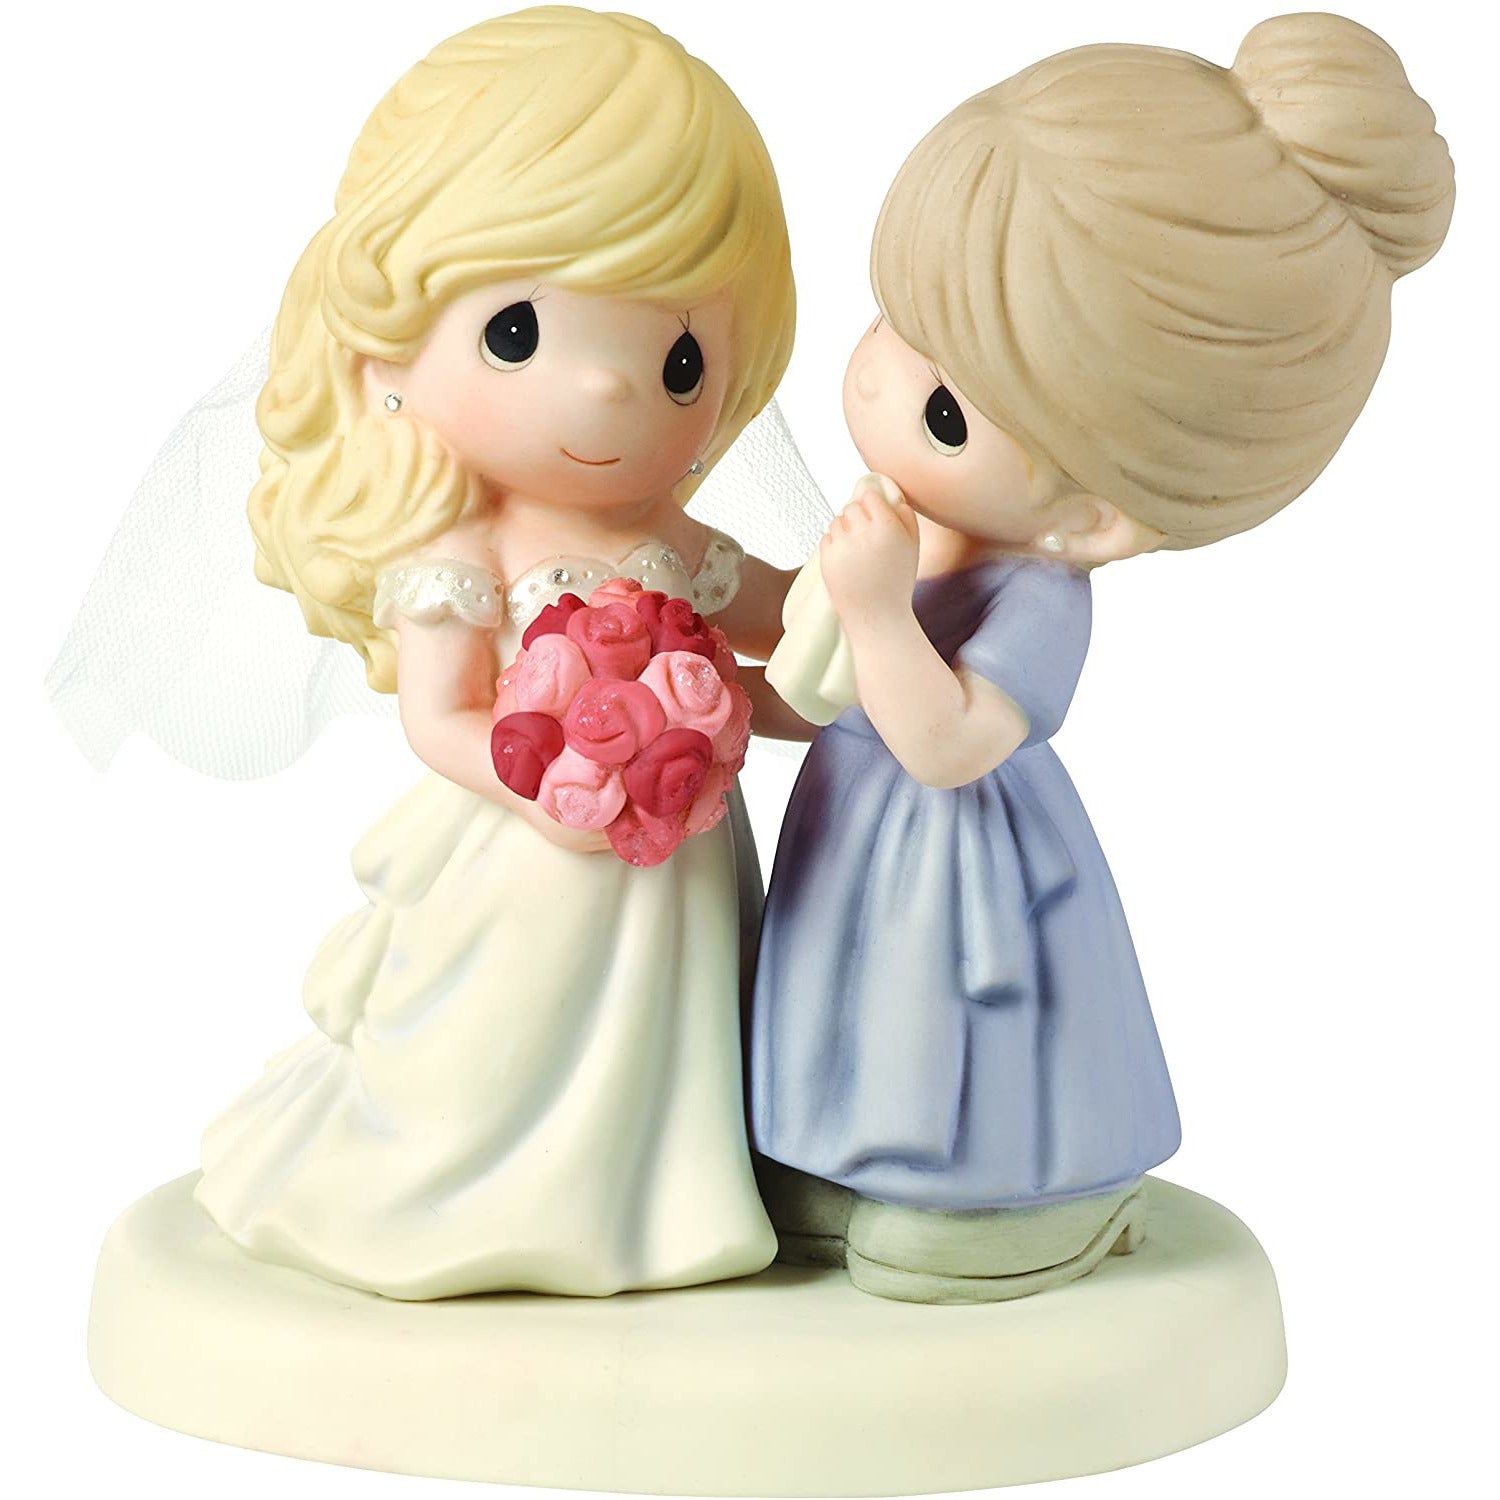 Precious Moments, My Daughter, My Pride, A Beautiful Bride Bisque Porcelain Figurine, Mother and Daughter, 153009